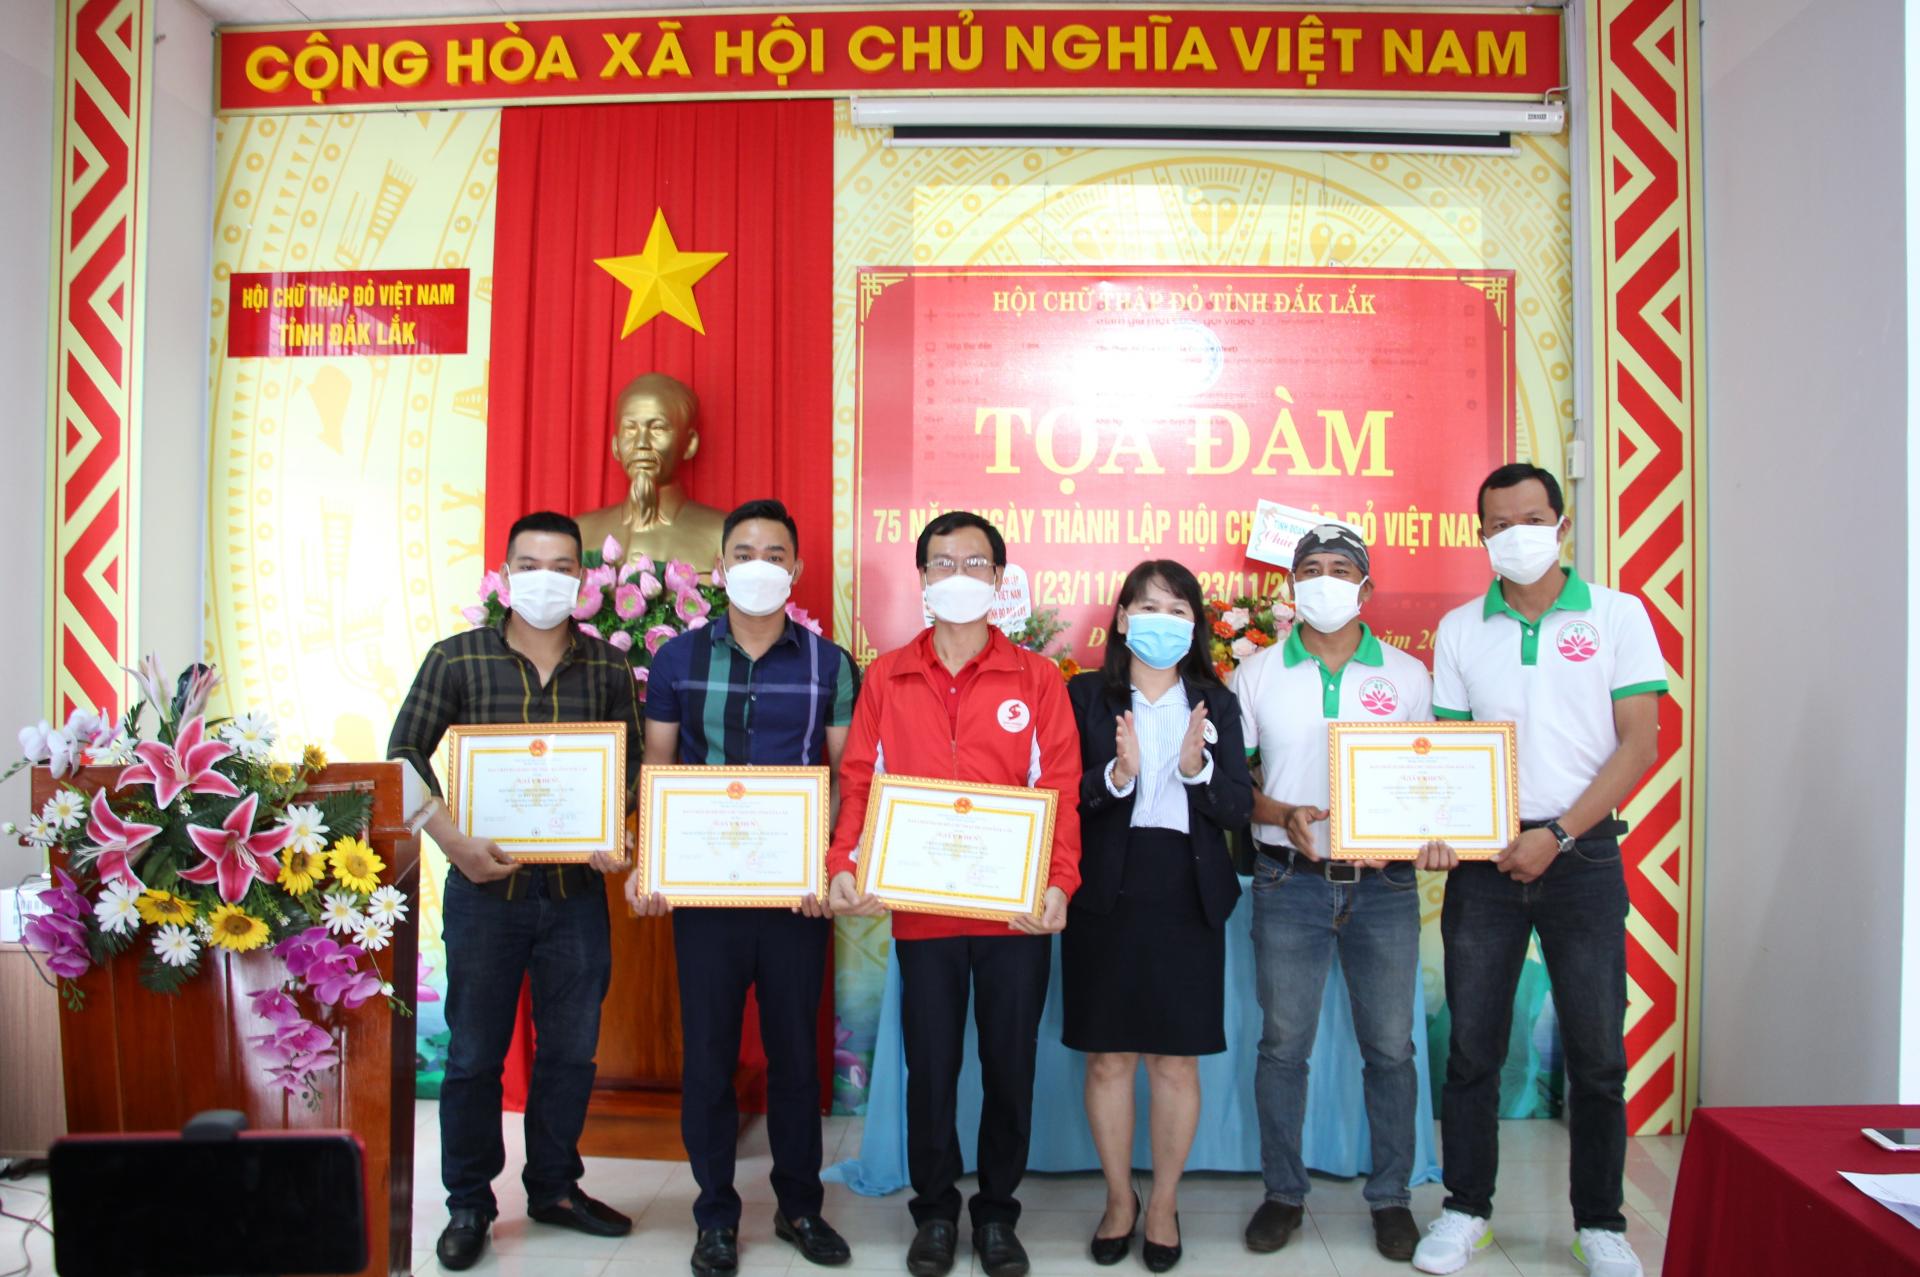 A meeting to celebrate the 75th anniversary of the Viet Nam Red Cross Society